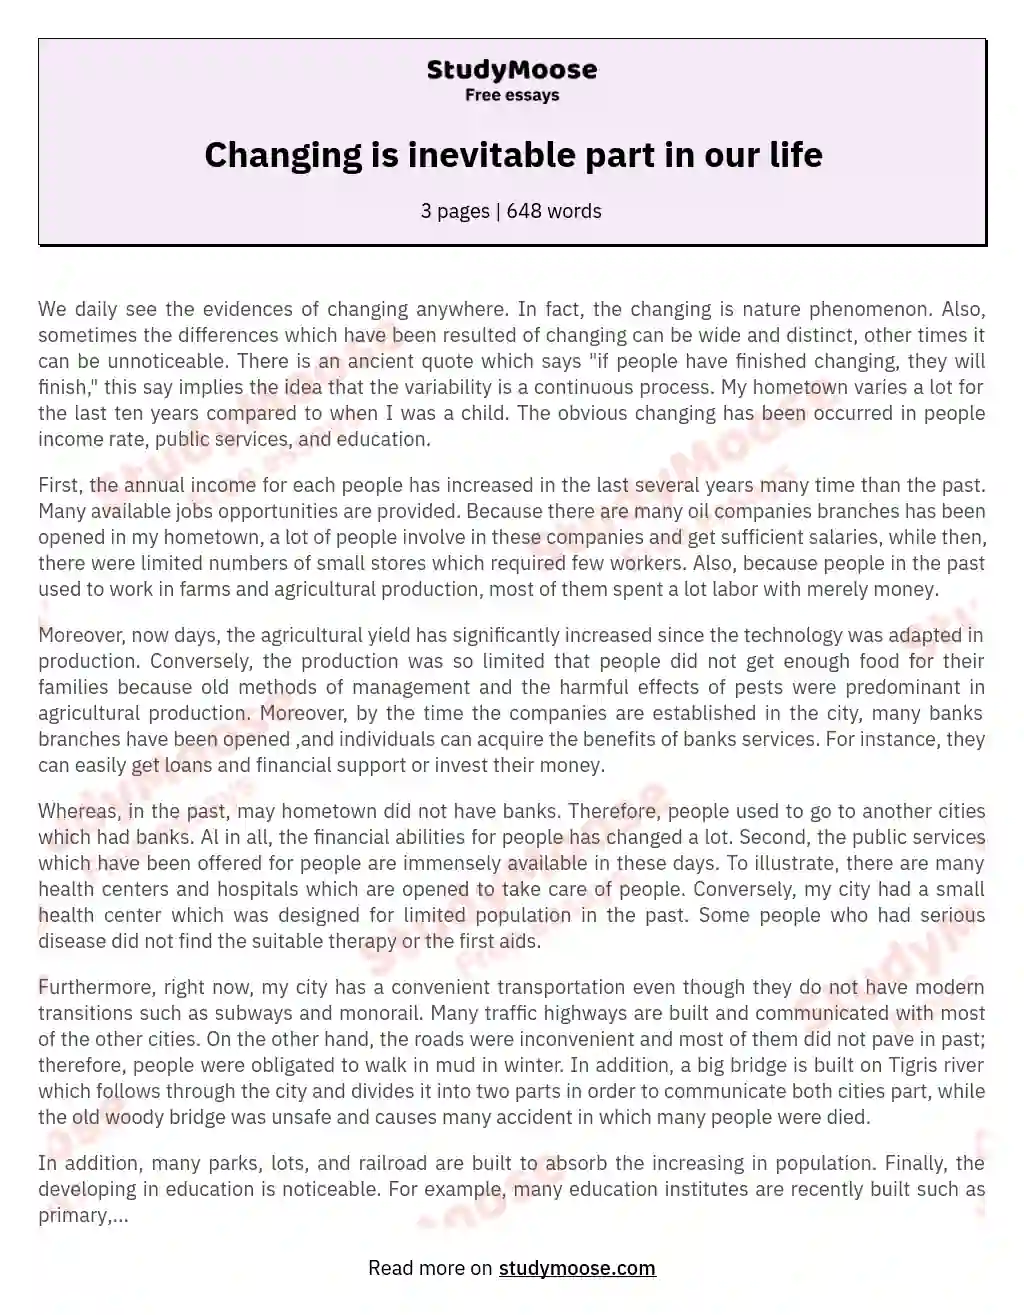 Changing is inevitable part in our life essay